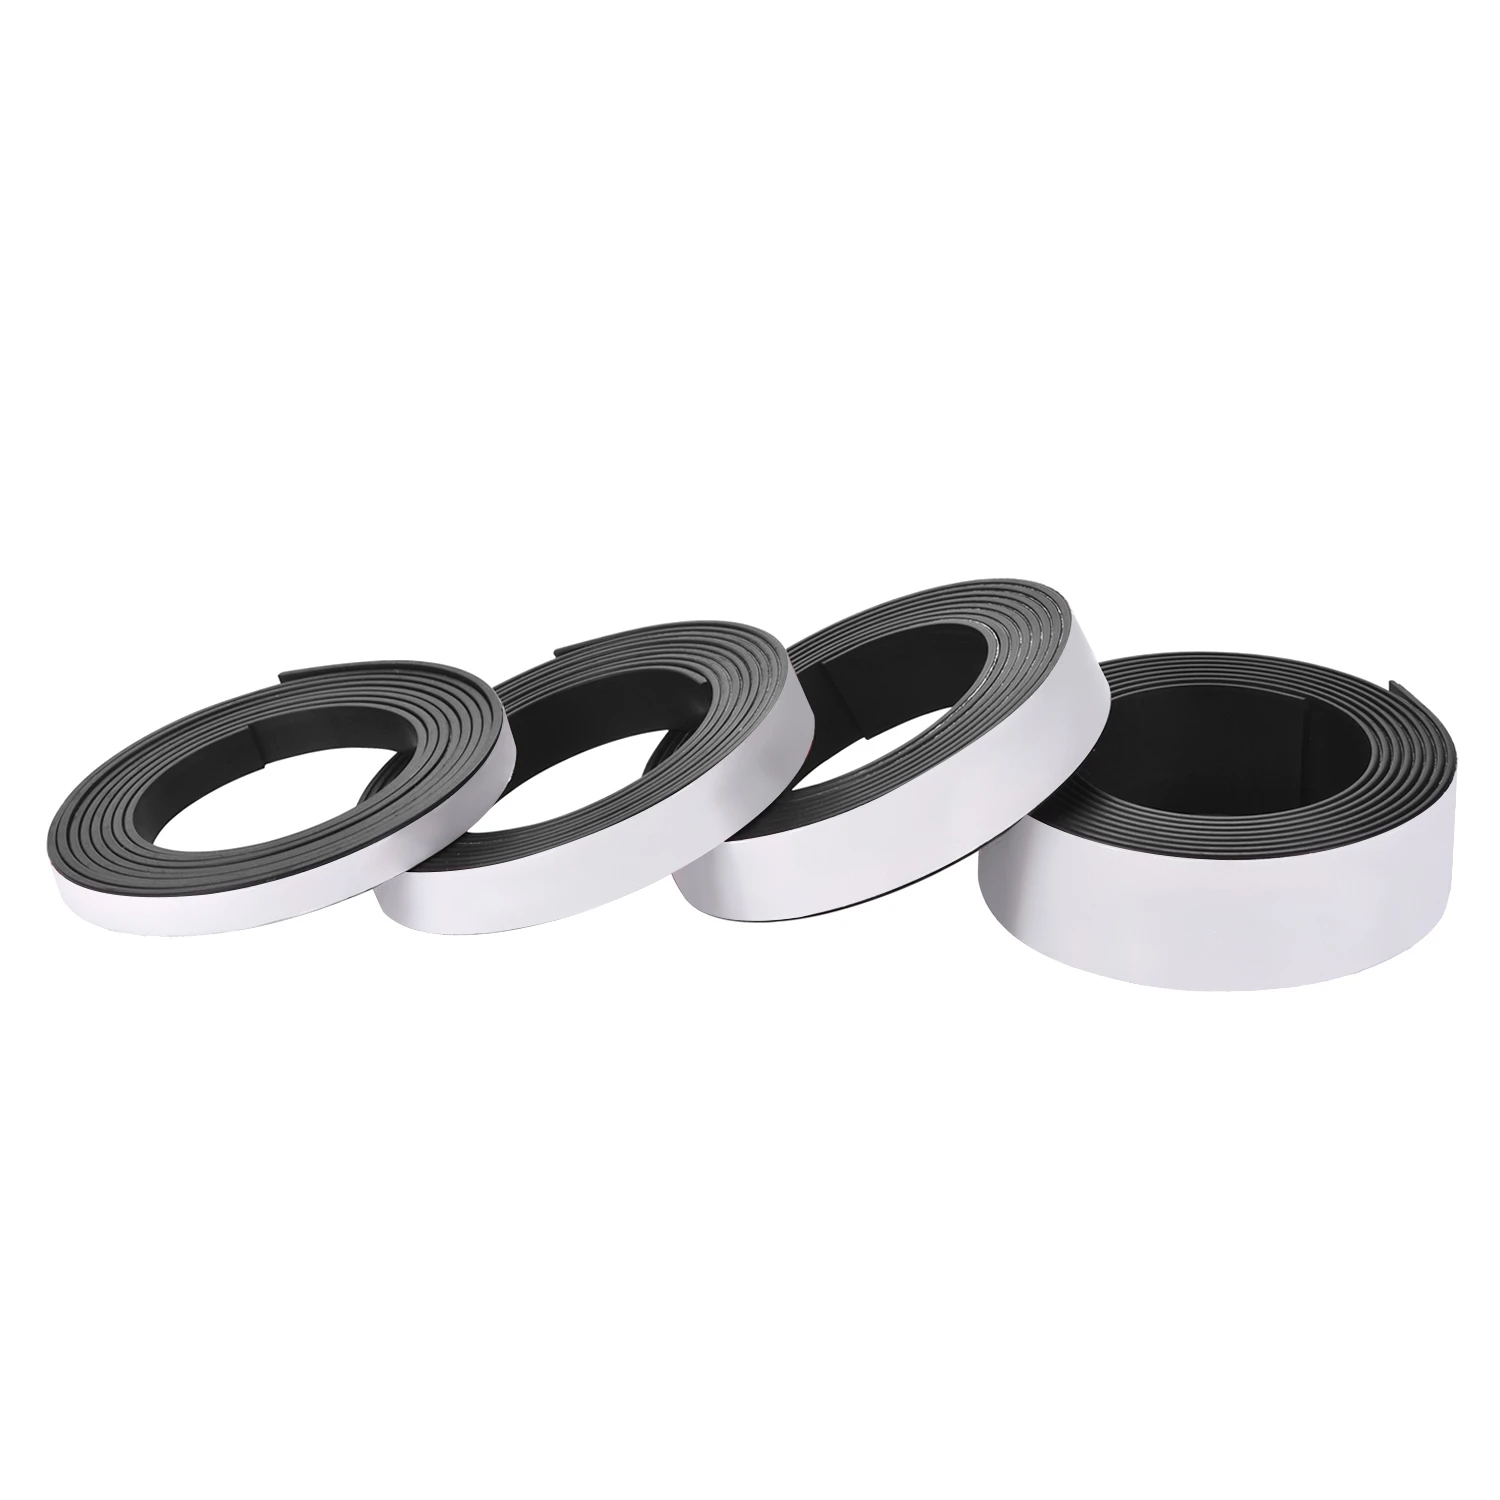 1 Meter Self Adhesive Flexible Soft Magnet Magnetic Strip Rubber Magnets Tape for Crafts Width 10mm 15mm 20mm 30mm